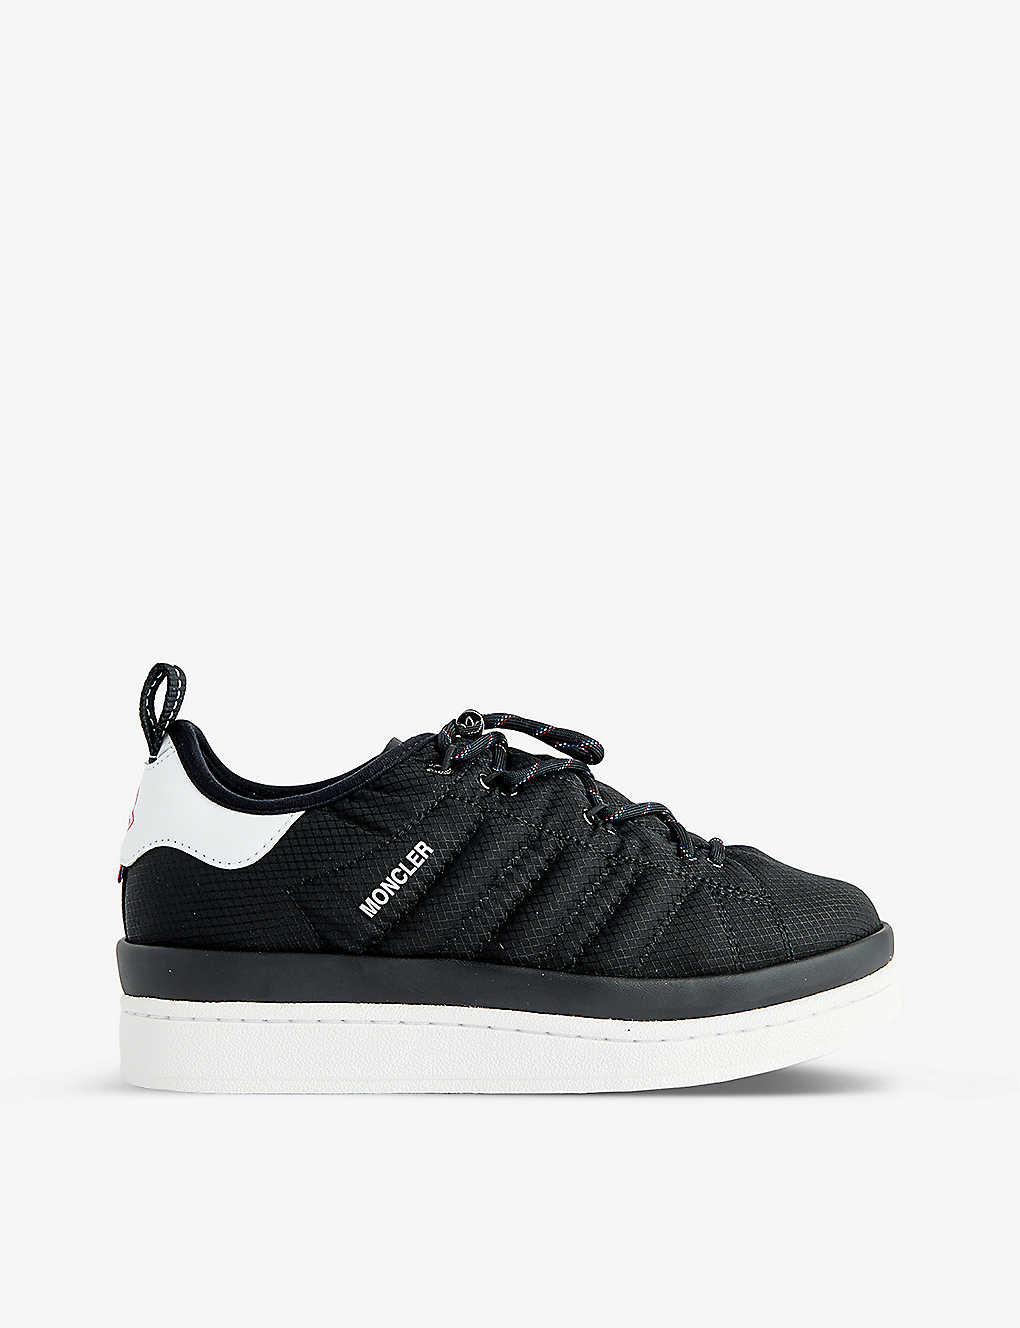 Moncler Genius Moncler X Adidas Campus Leather Trainers In 999